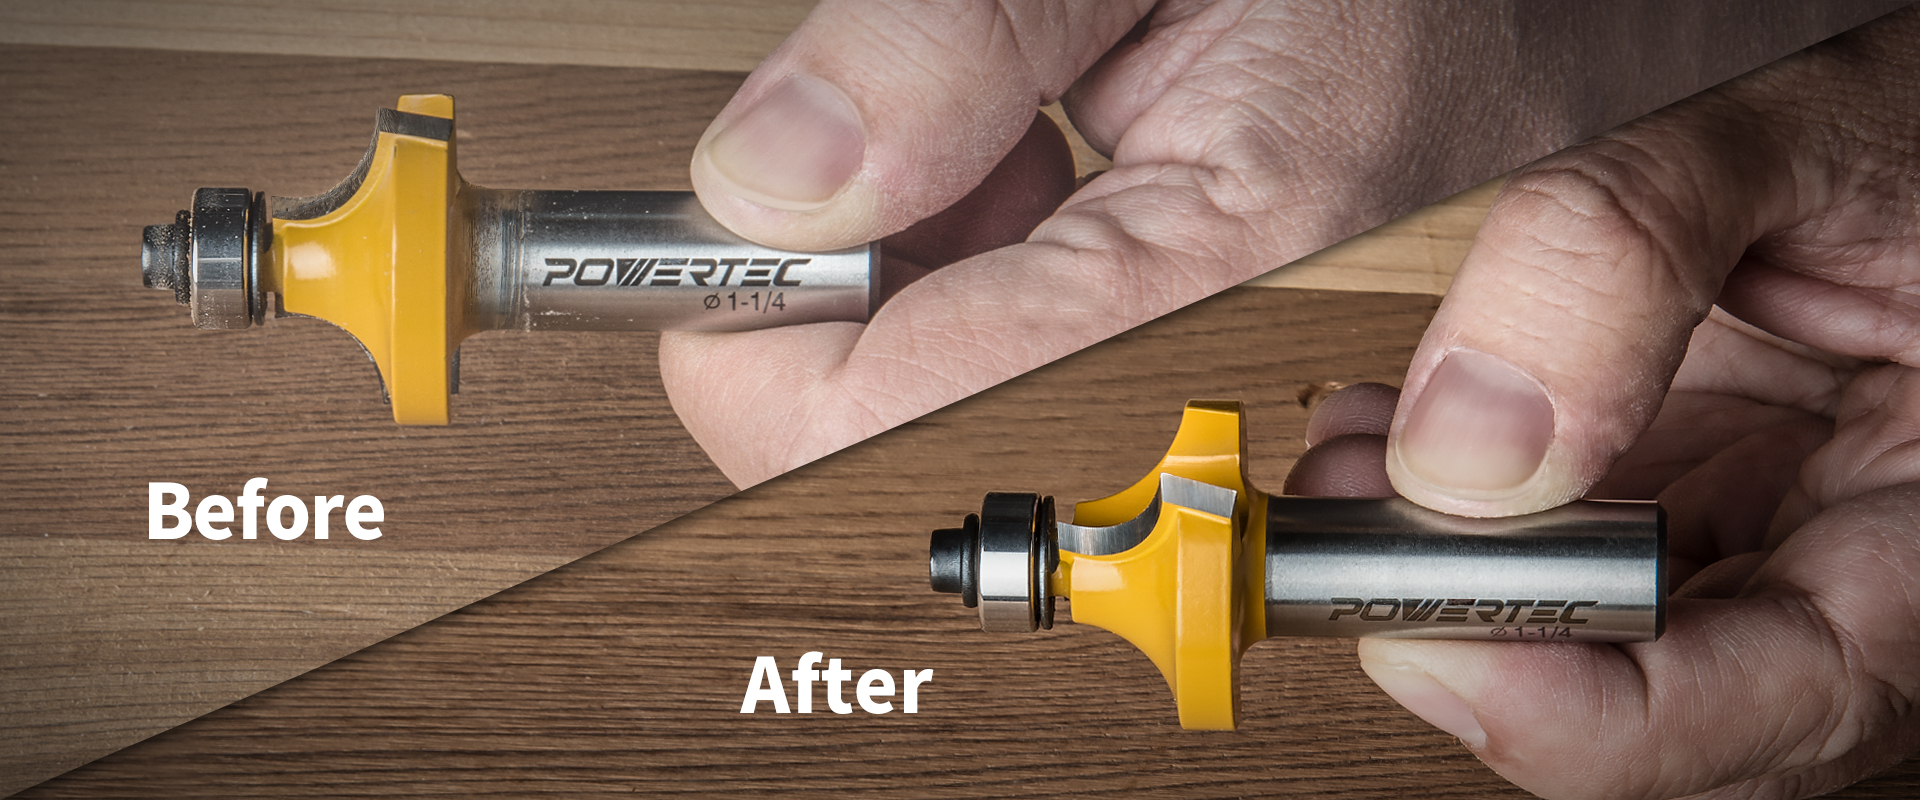 router bits Cleaning - POWERTEC Router Accessories